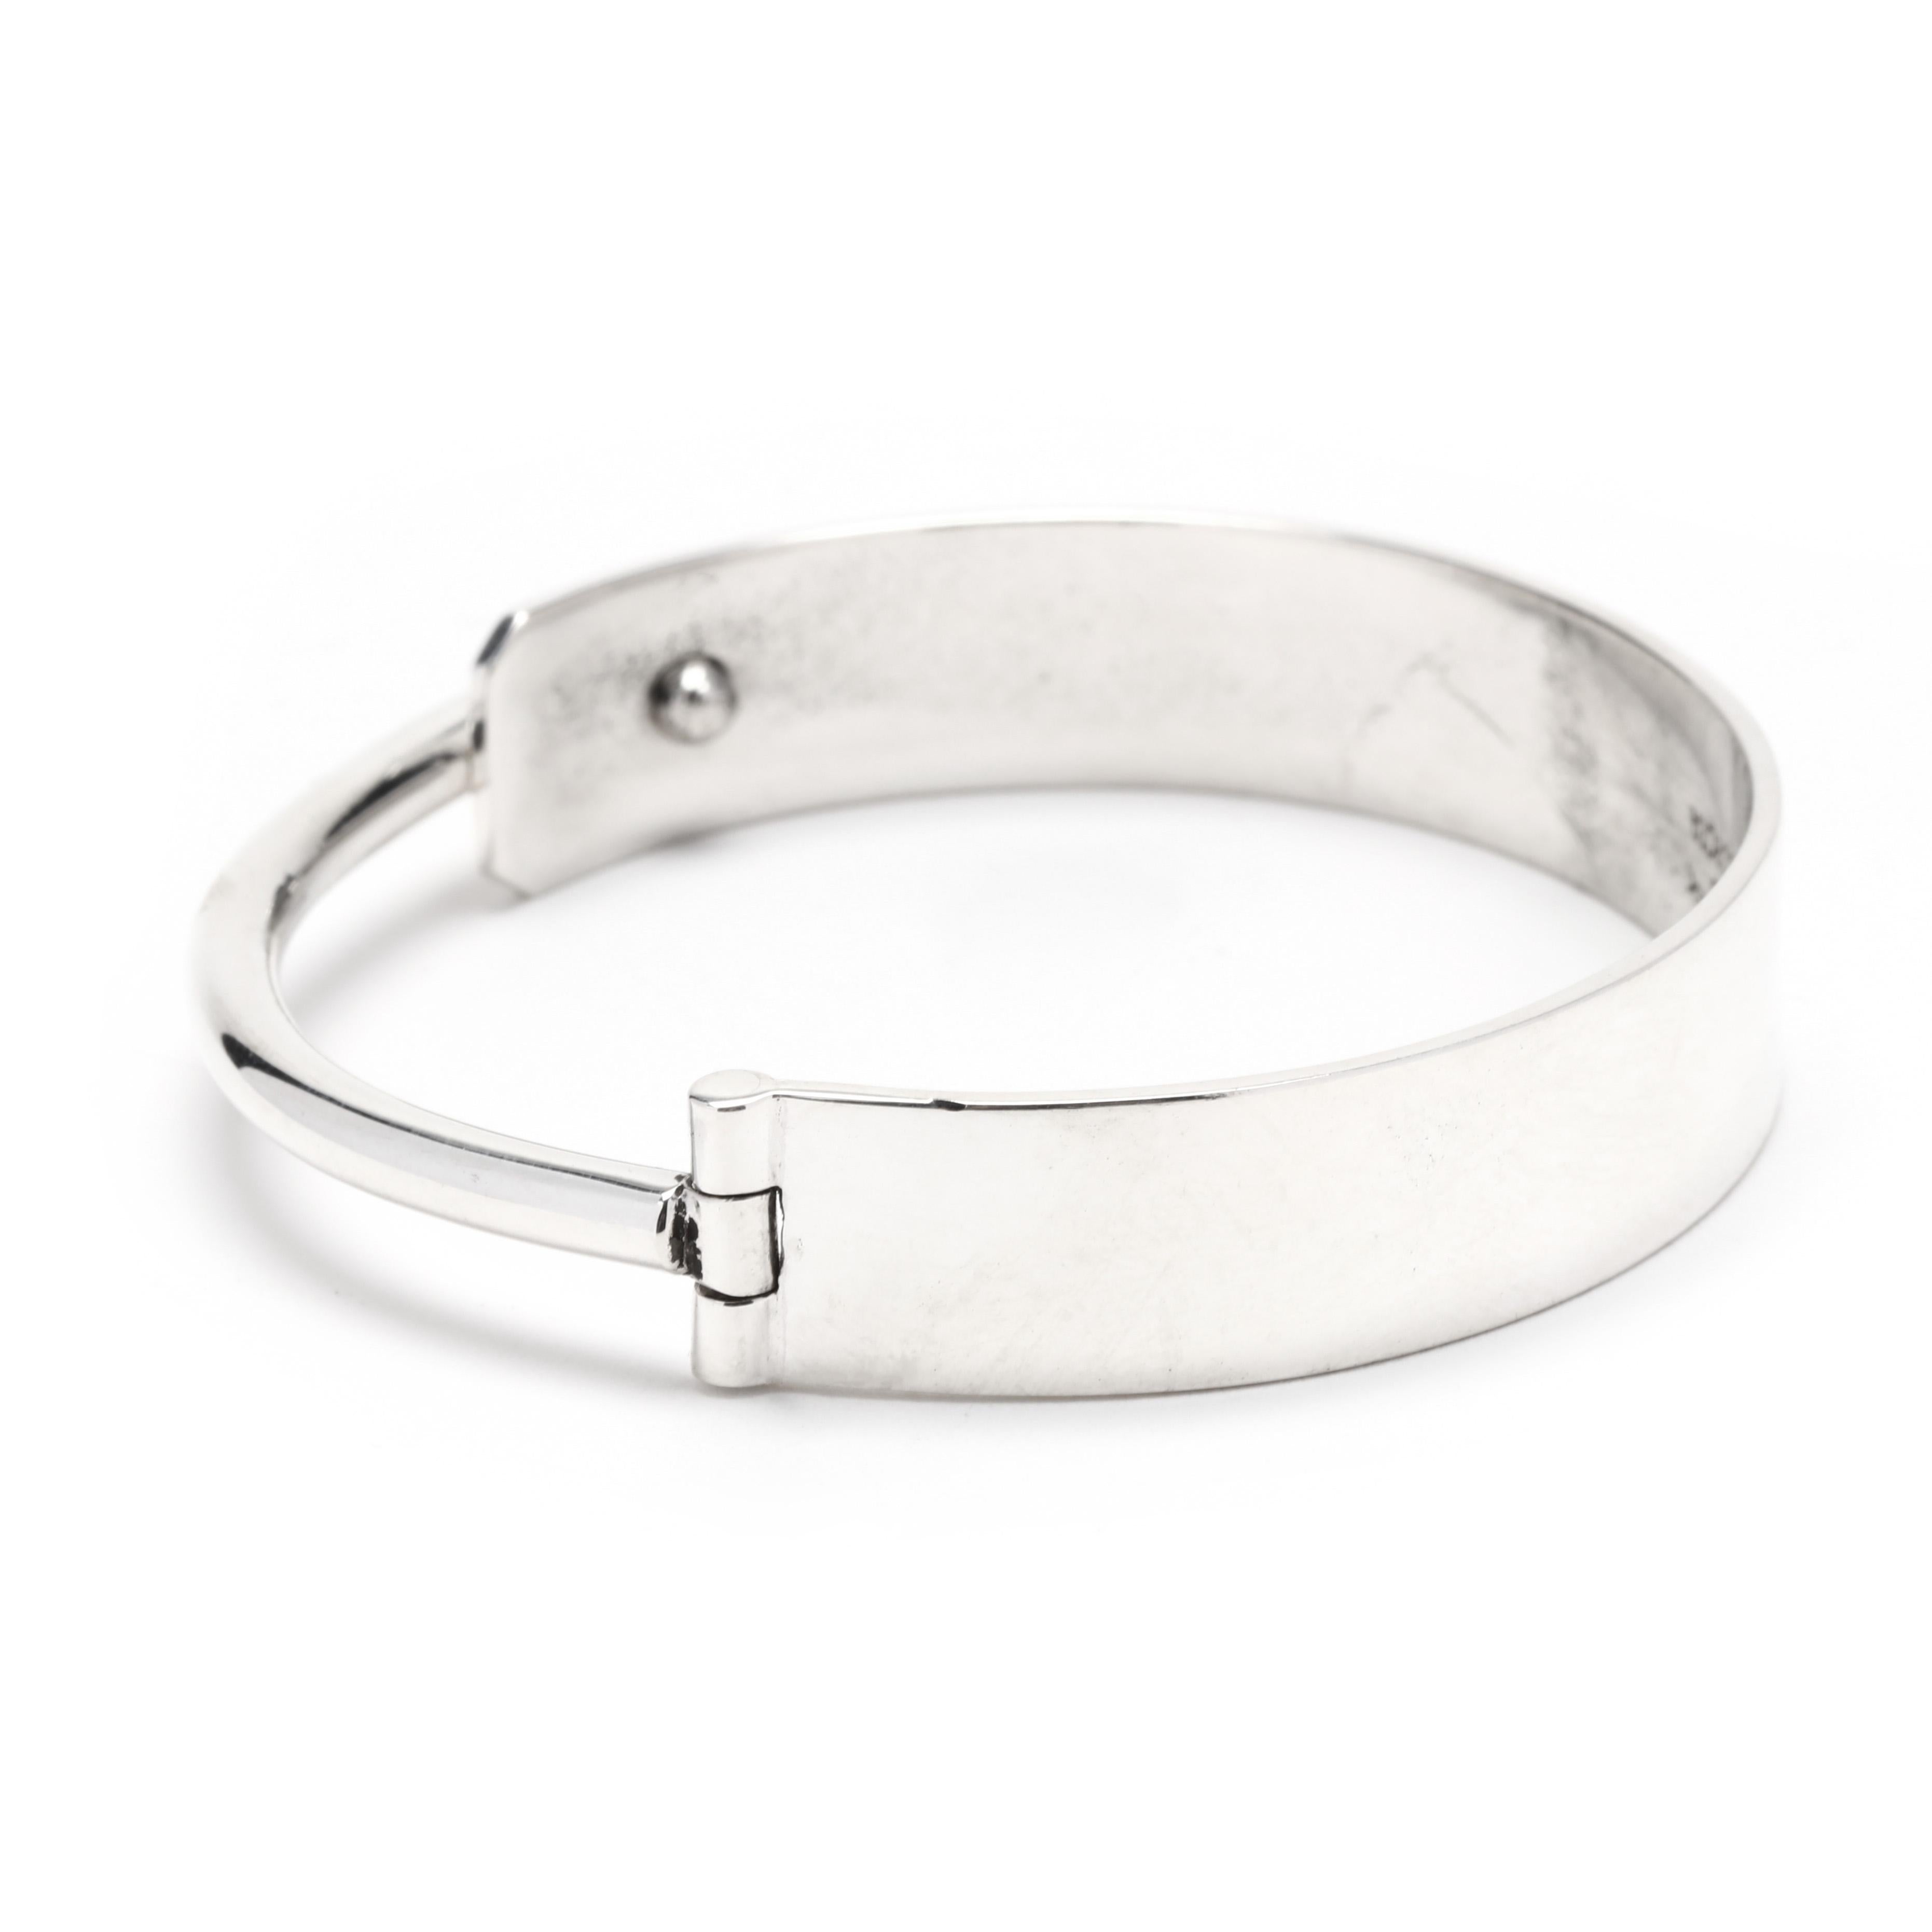 This elegant Mexican Escorcia Modern Hinged Bangle Bracelet is crafted from sterling silver for an eye-catching accessory. The simple design features a classic hinged bangle with an overall length of 7 inches. This timeless piece is perfect for